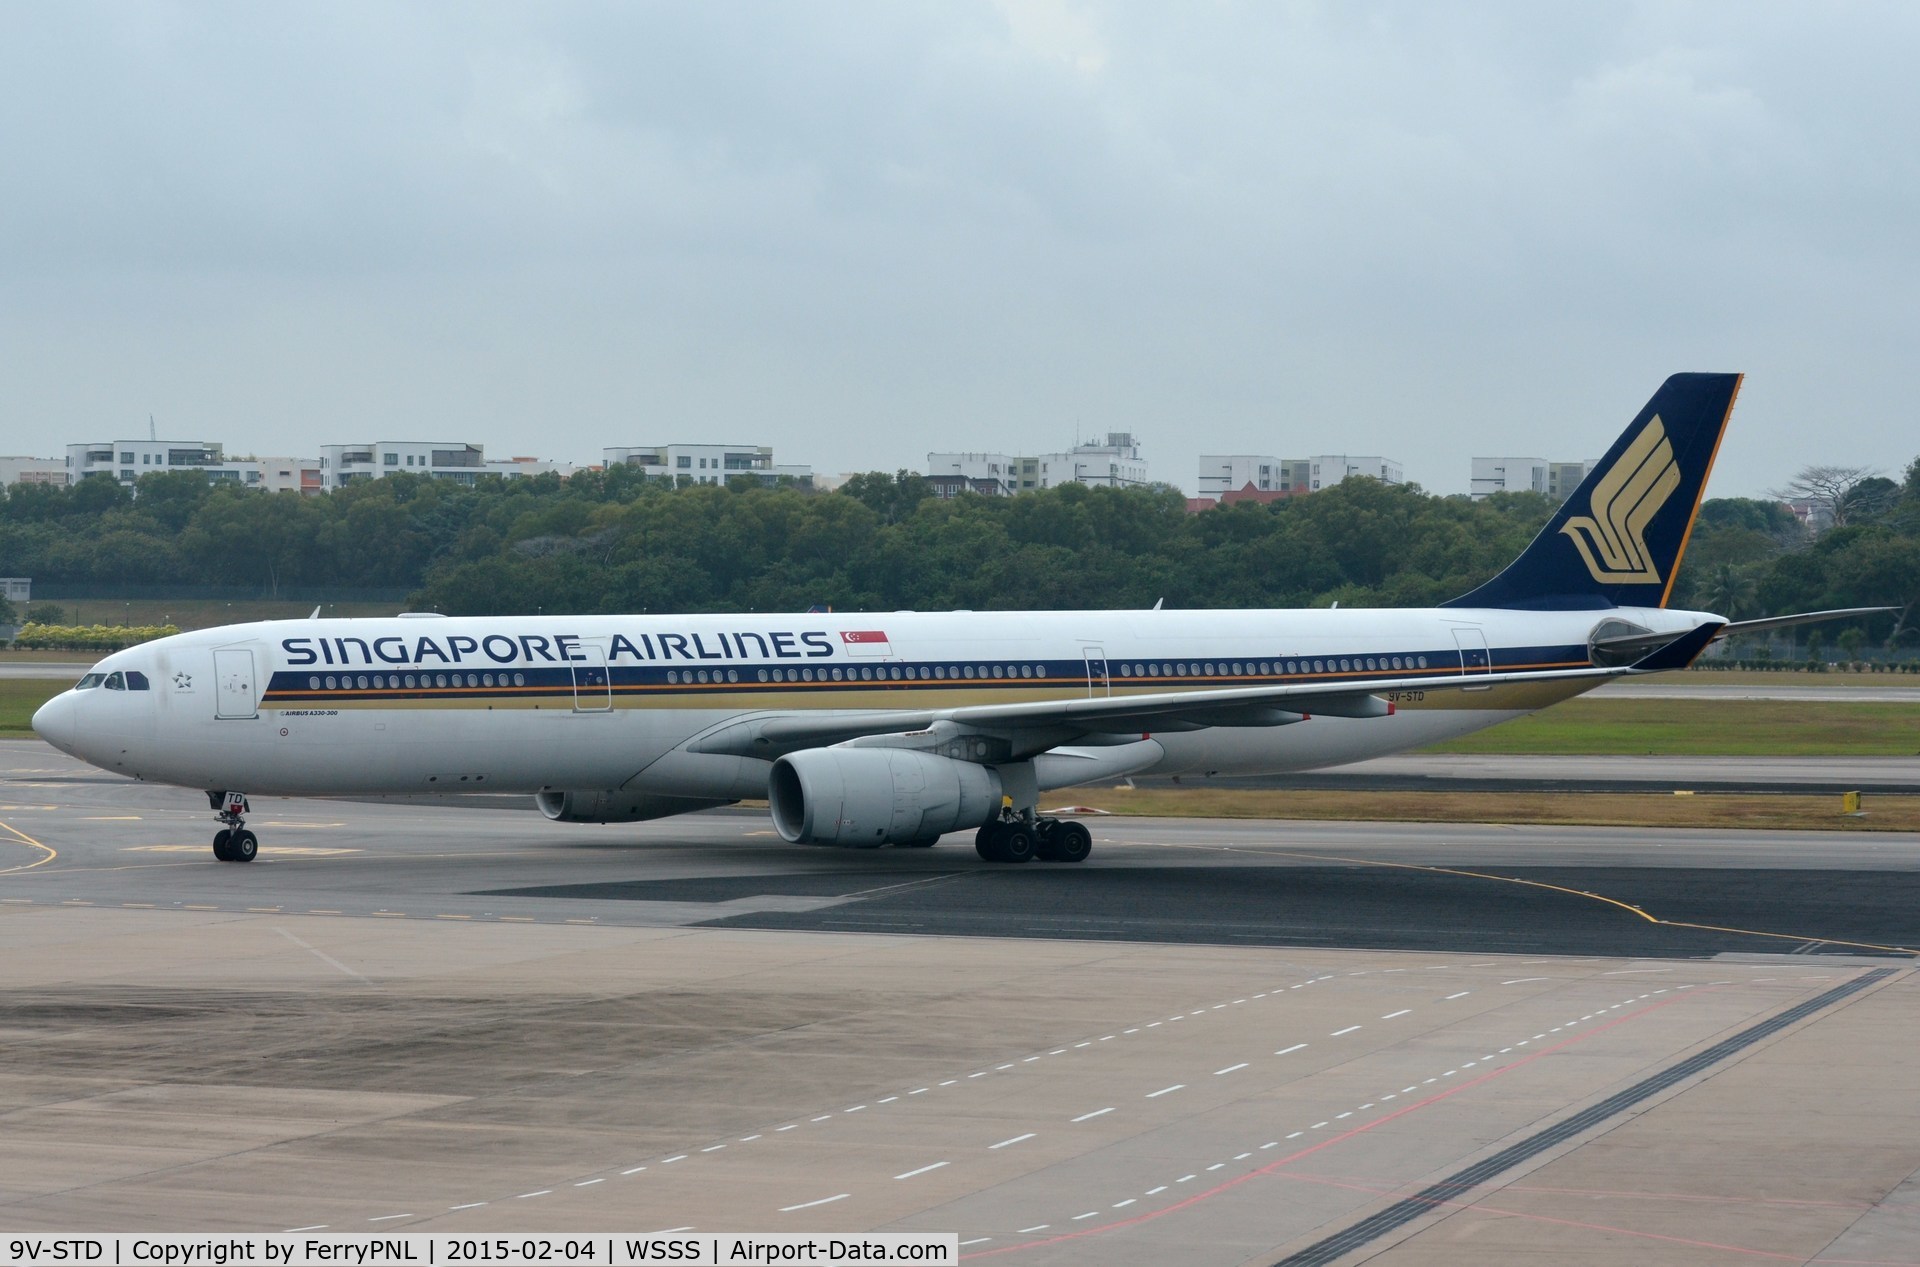 9V-STD, 2009 Airbus A330-343 C/N 997, Singapore A333 just landed.